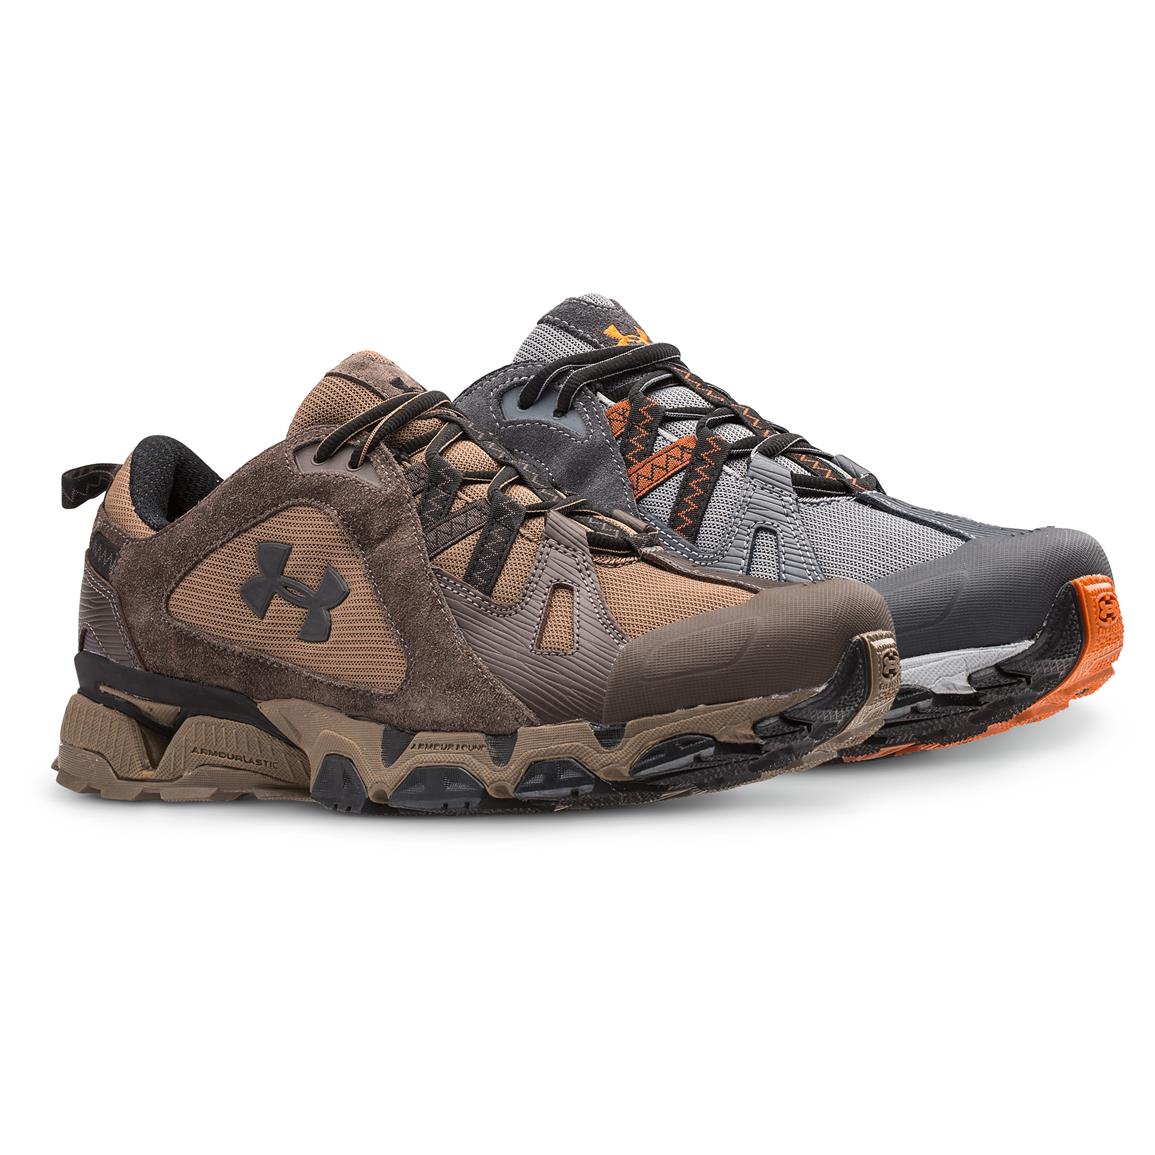 Under Armour Men's Chetco Trail Running Shoes 656098